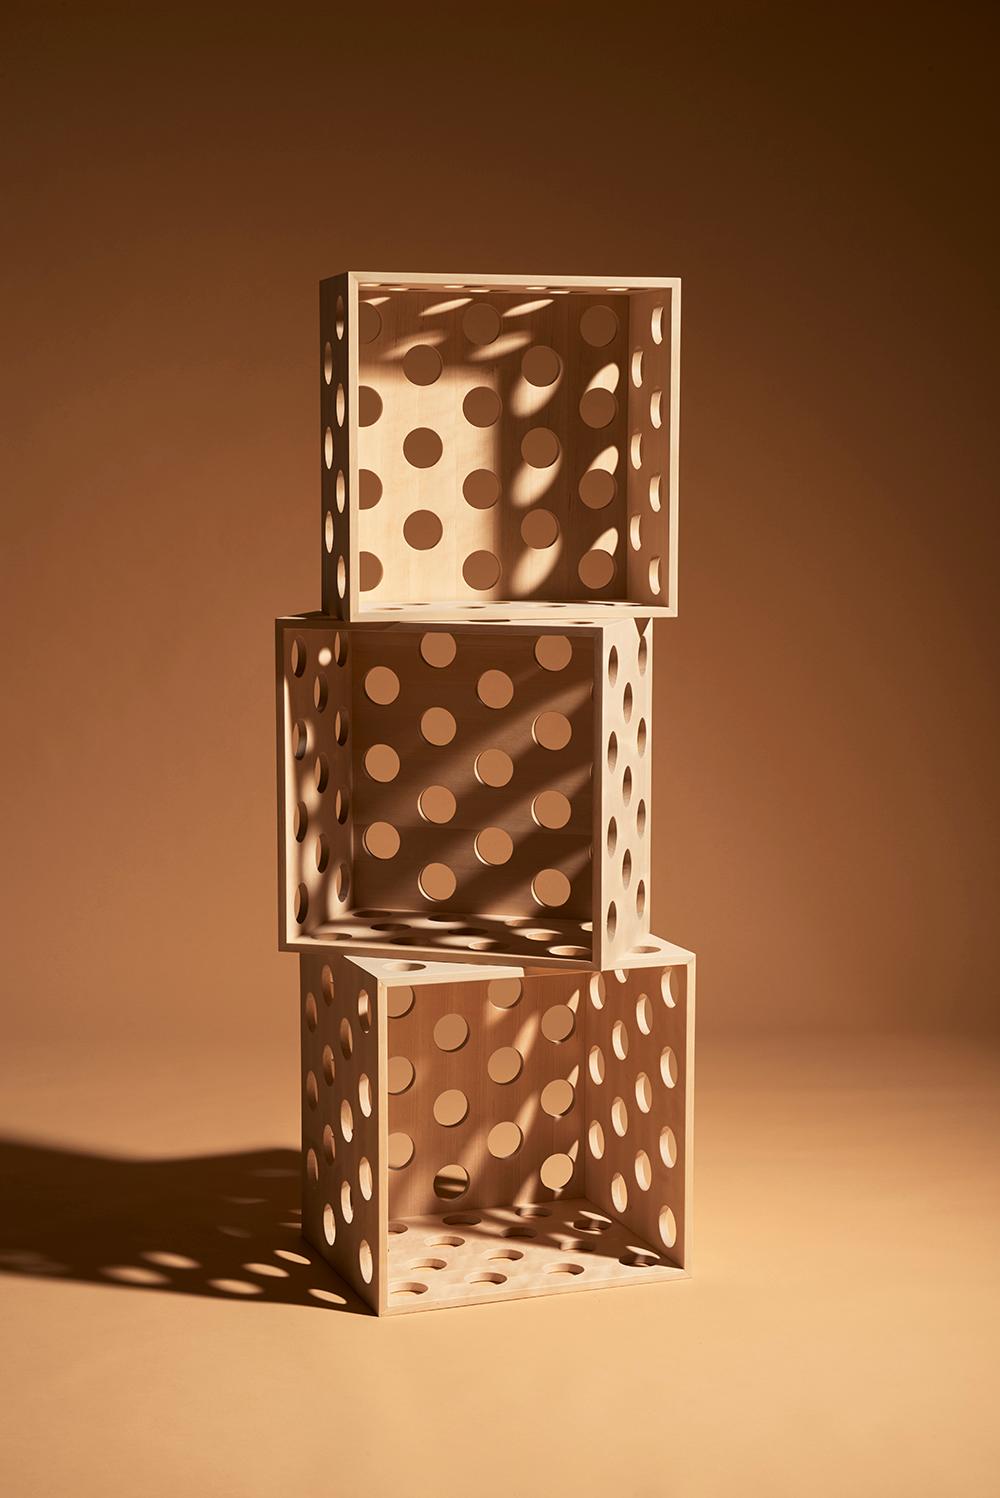 Contemporary Perforated Medium Storage Box, Solid Birch Wood Perforated Box by Erik Olovsson For Sale